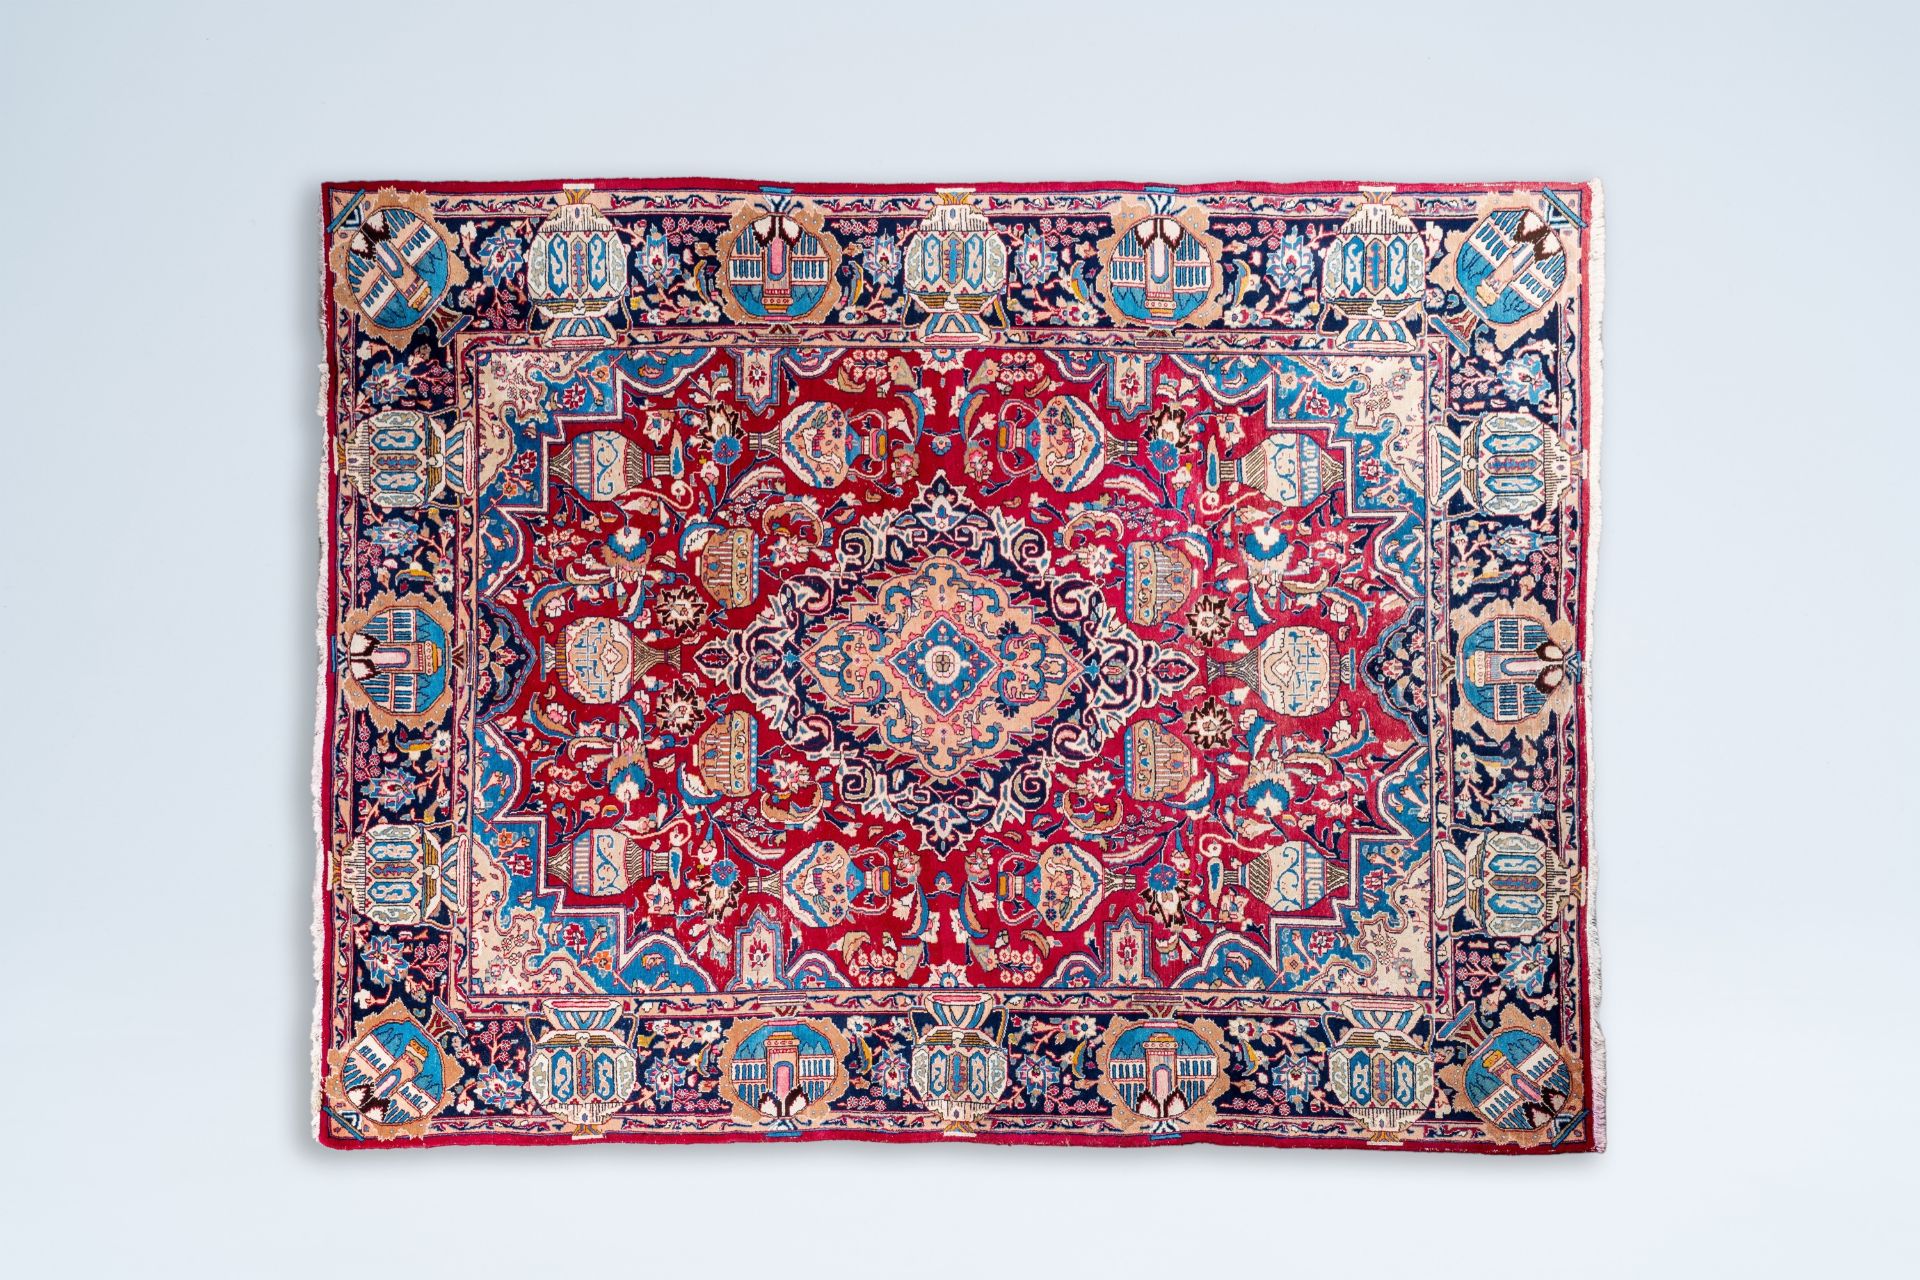 A large Iranian Kashmir rug with antiquities and floral design, wool on cotton, 20th C.